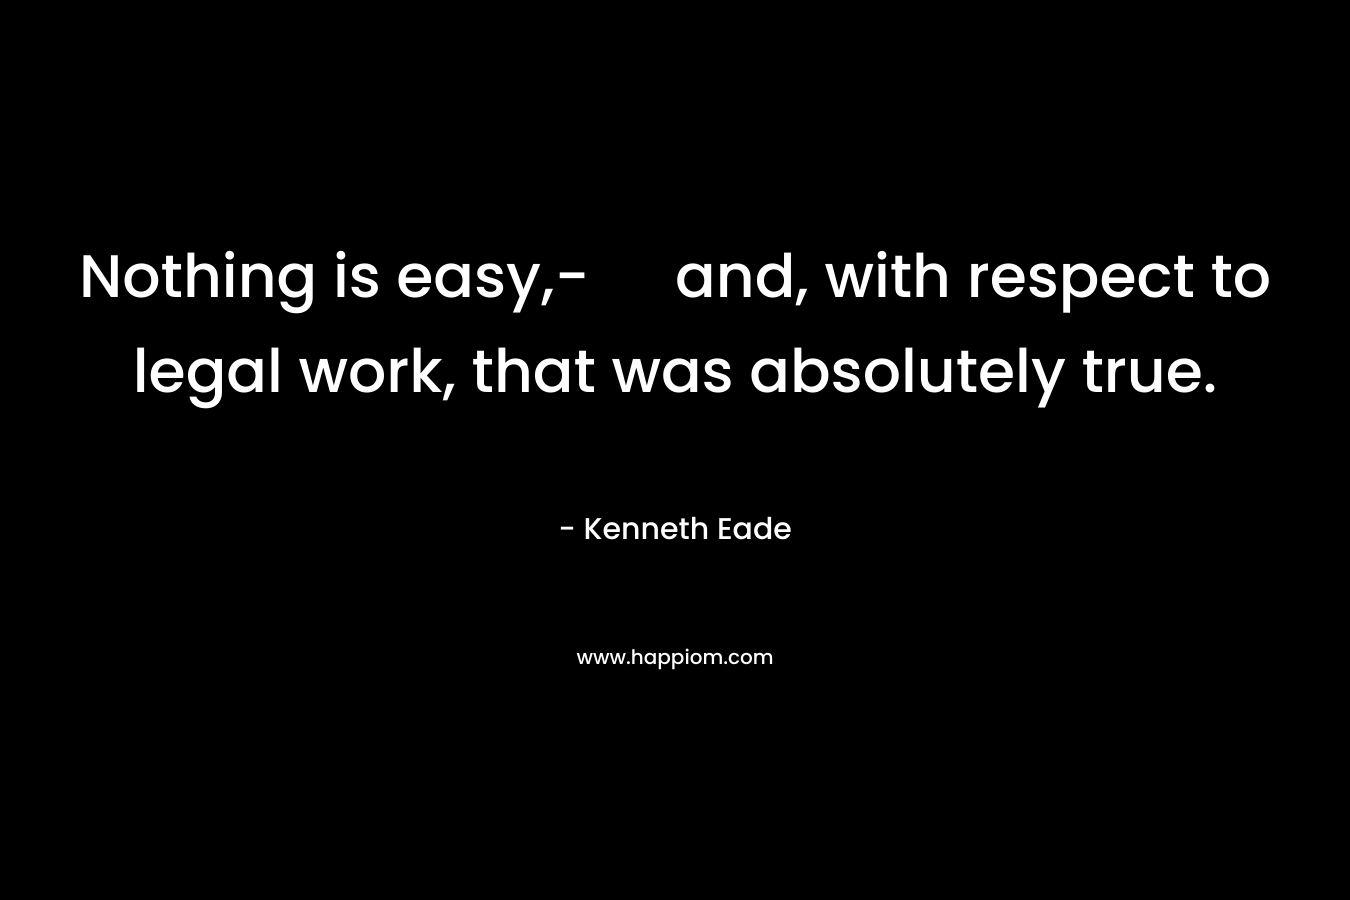 Nothing is easy,- and, with respect to legal work, that was absolutely true. – Kenneth Eade